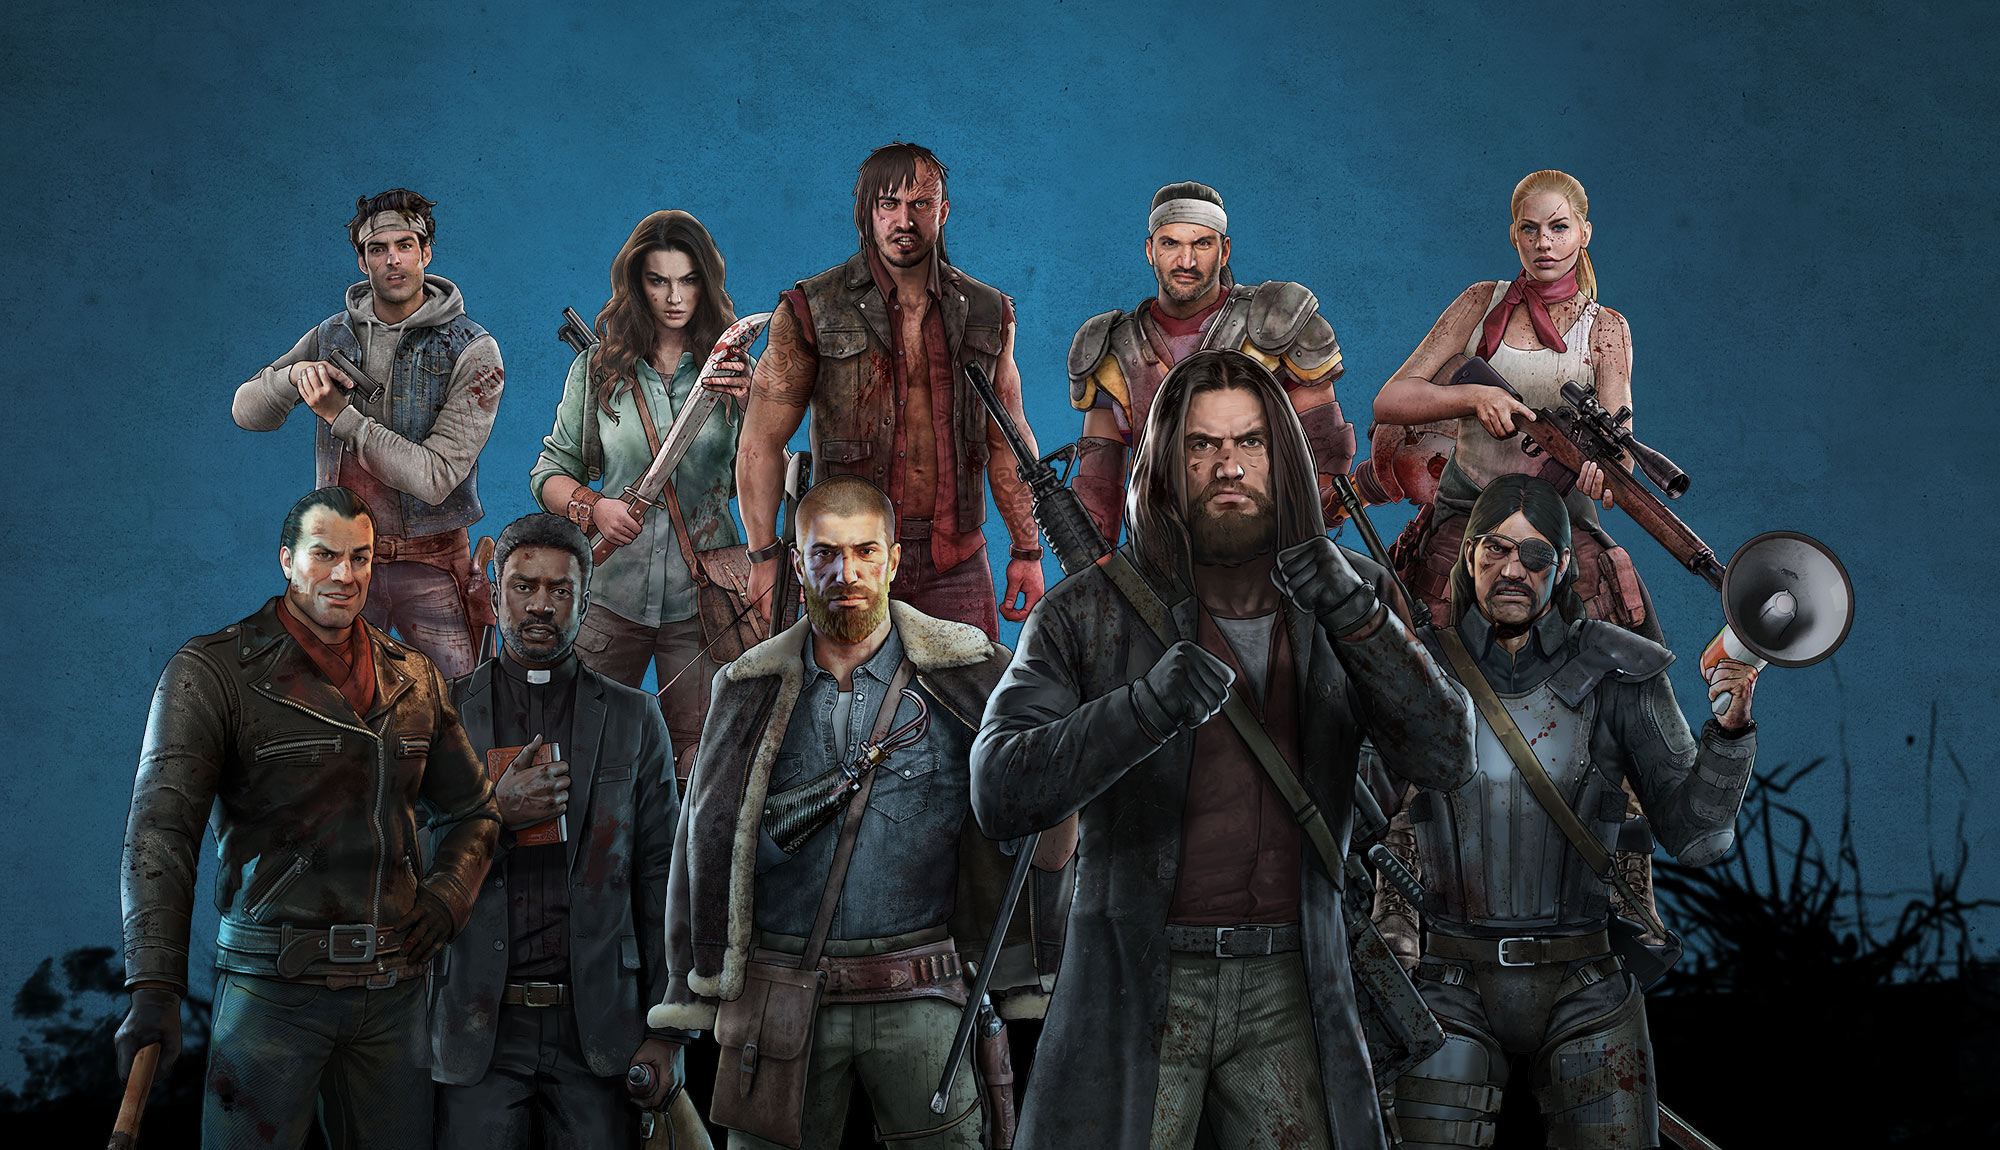 THE WALKING DEAD: SURVIVORS Available Globally on iOS and Android!